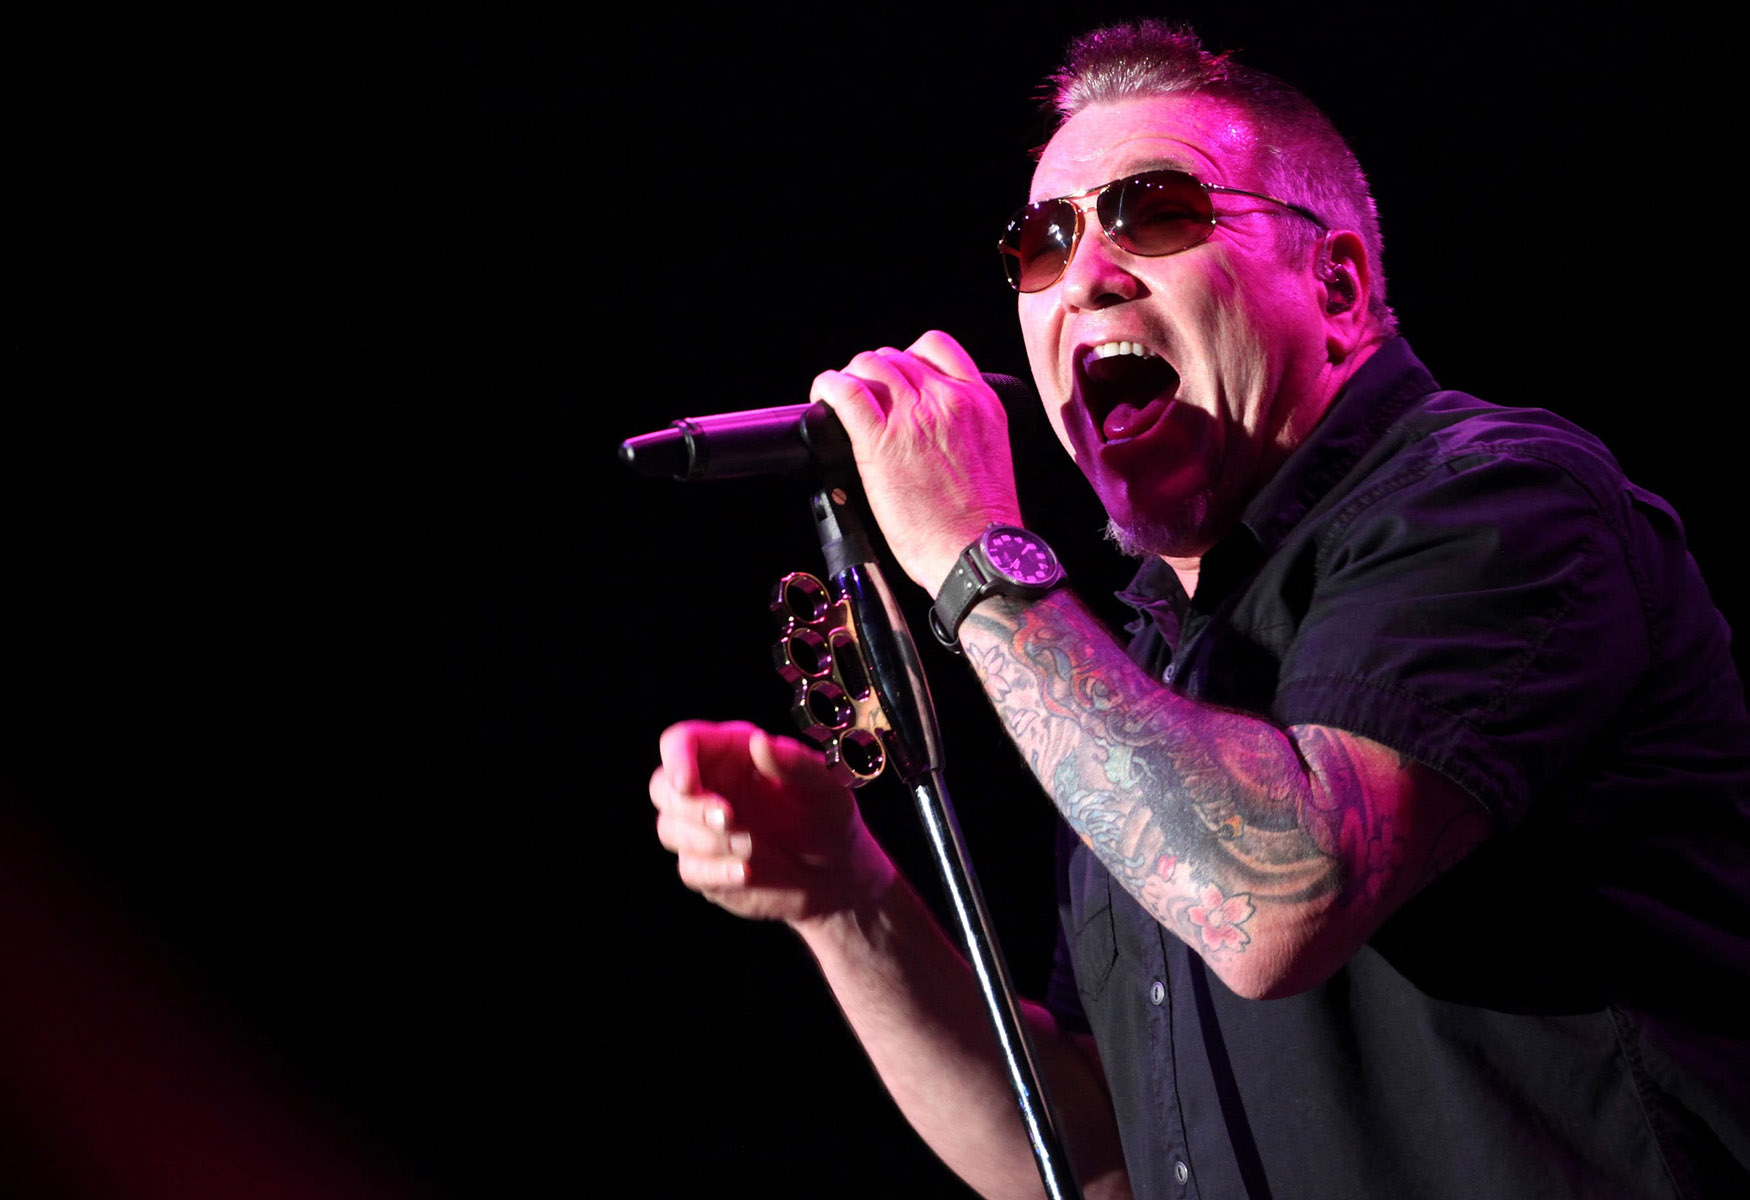 Smash Mouth’s Steve Harwell Cremated Ahead Of Public Memorial